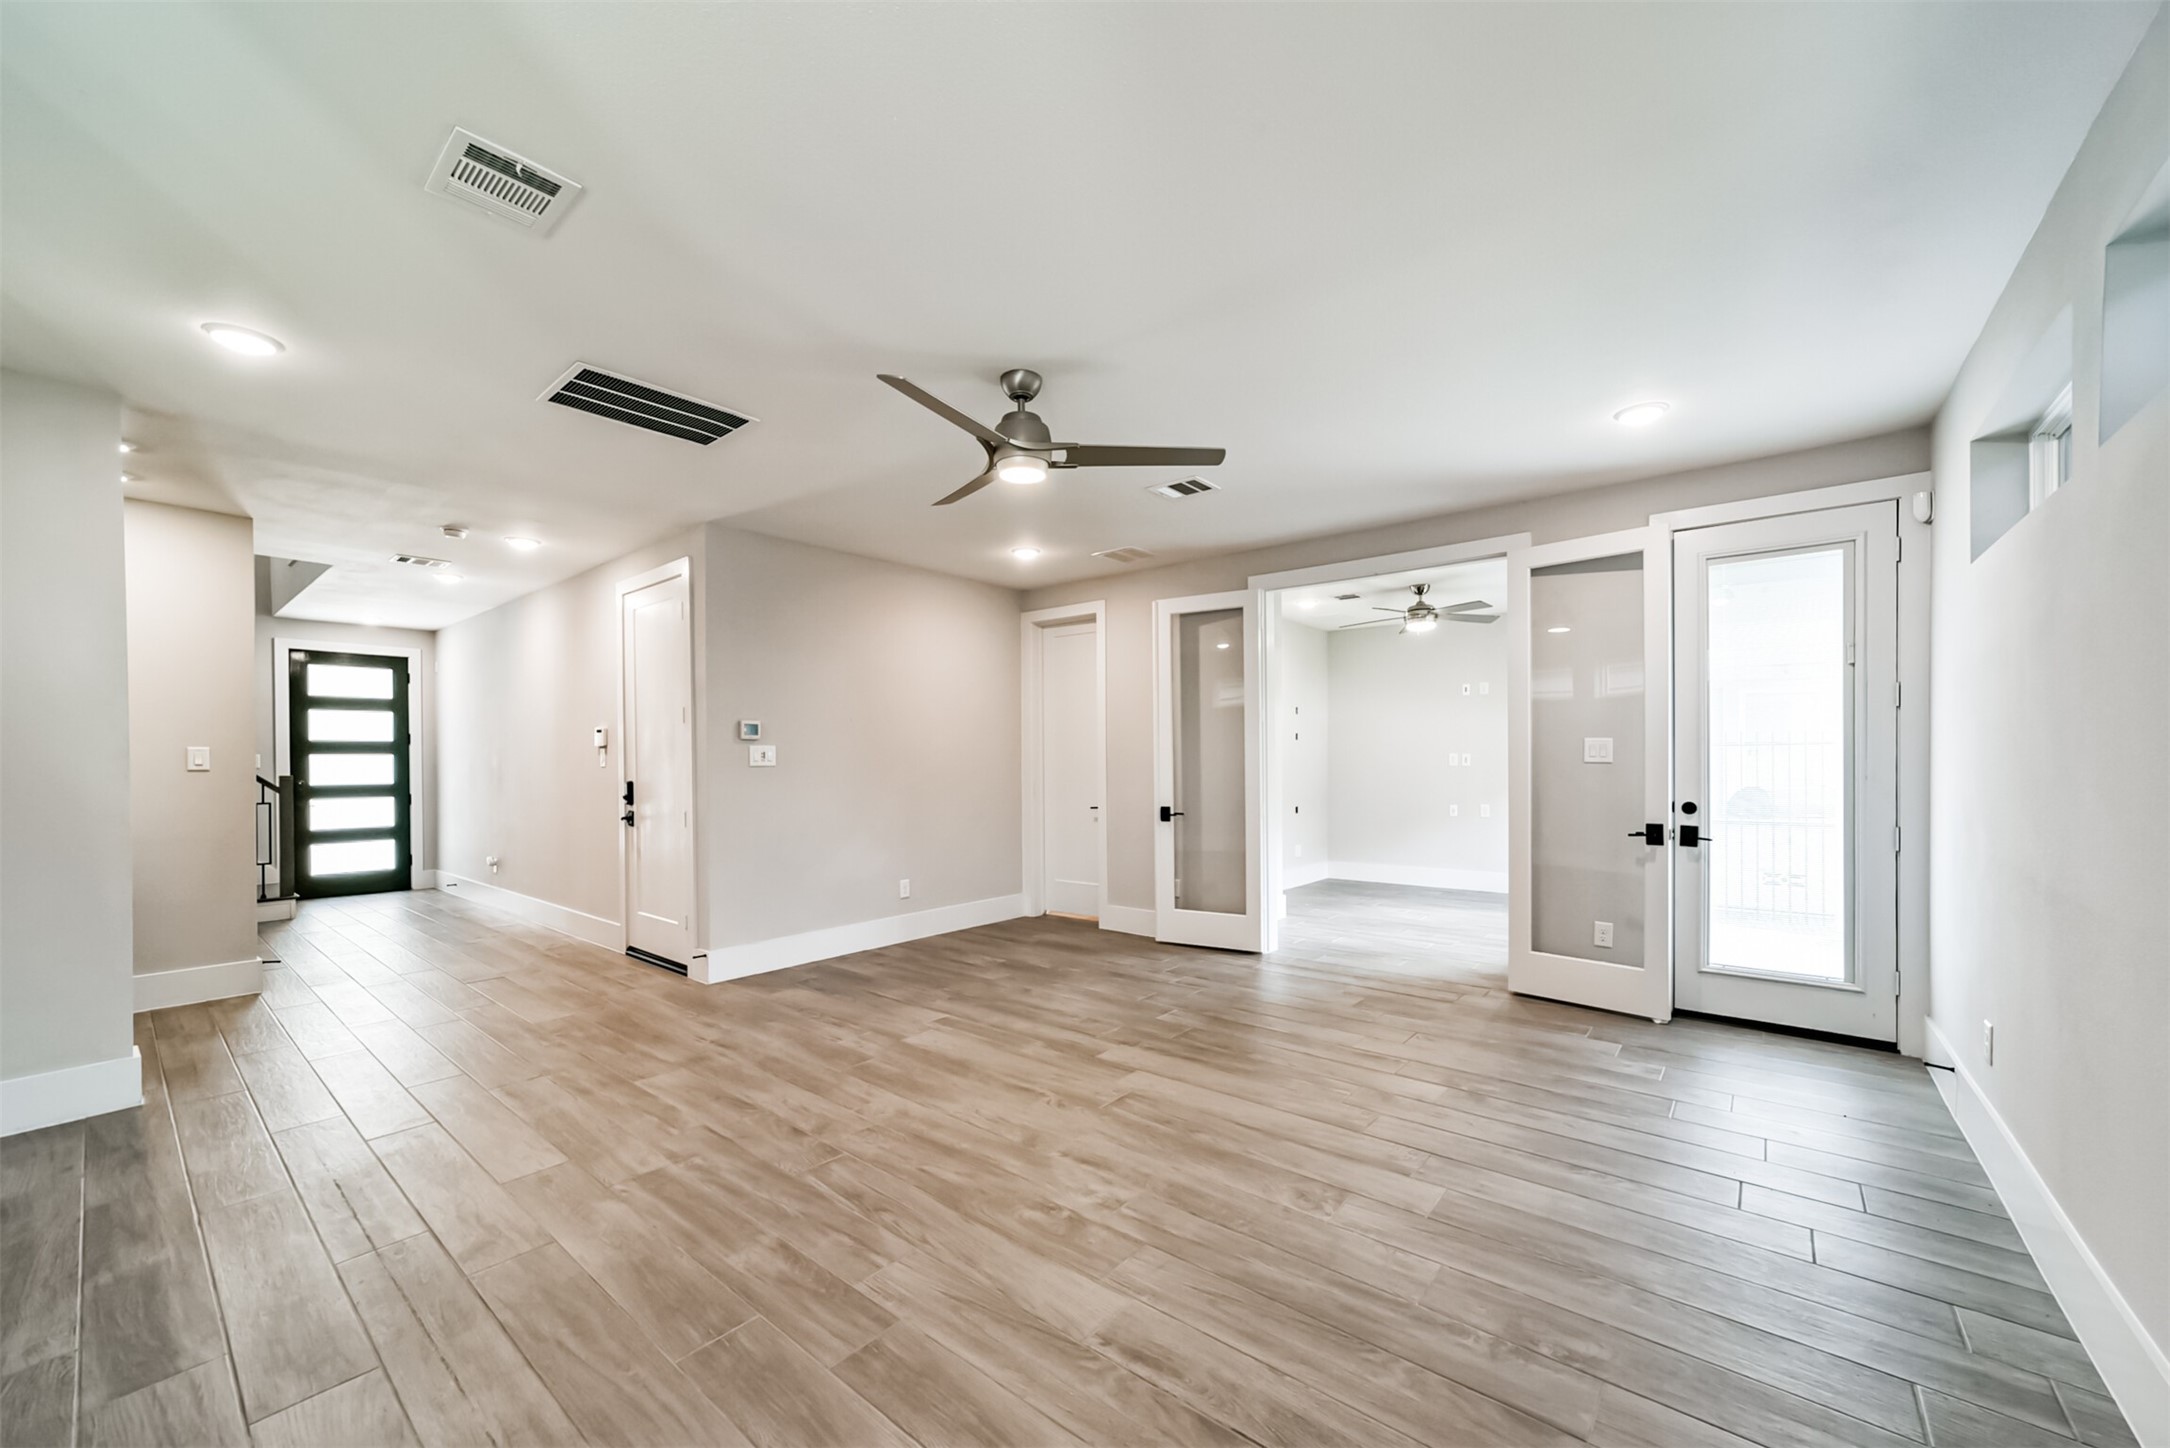 Incredible first floor game room/flex space with office and convenient half bathroom.